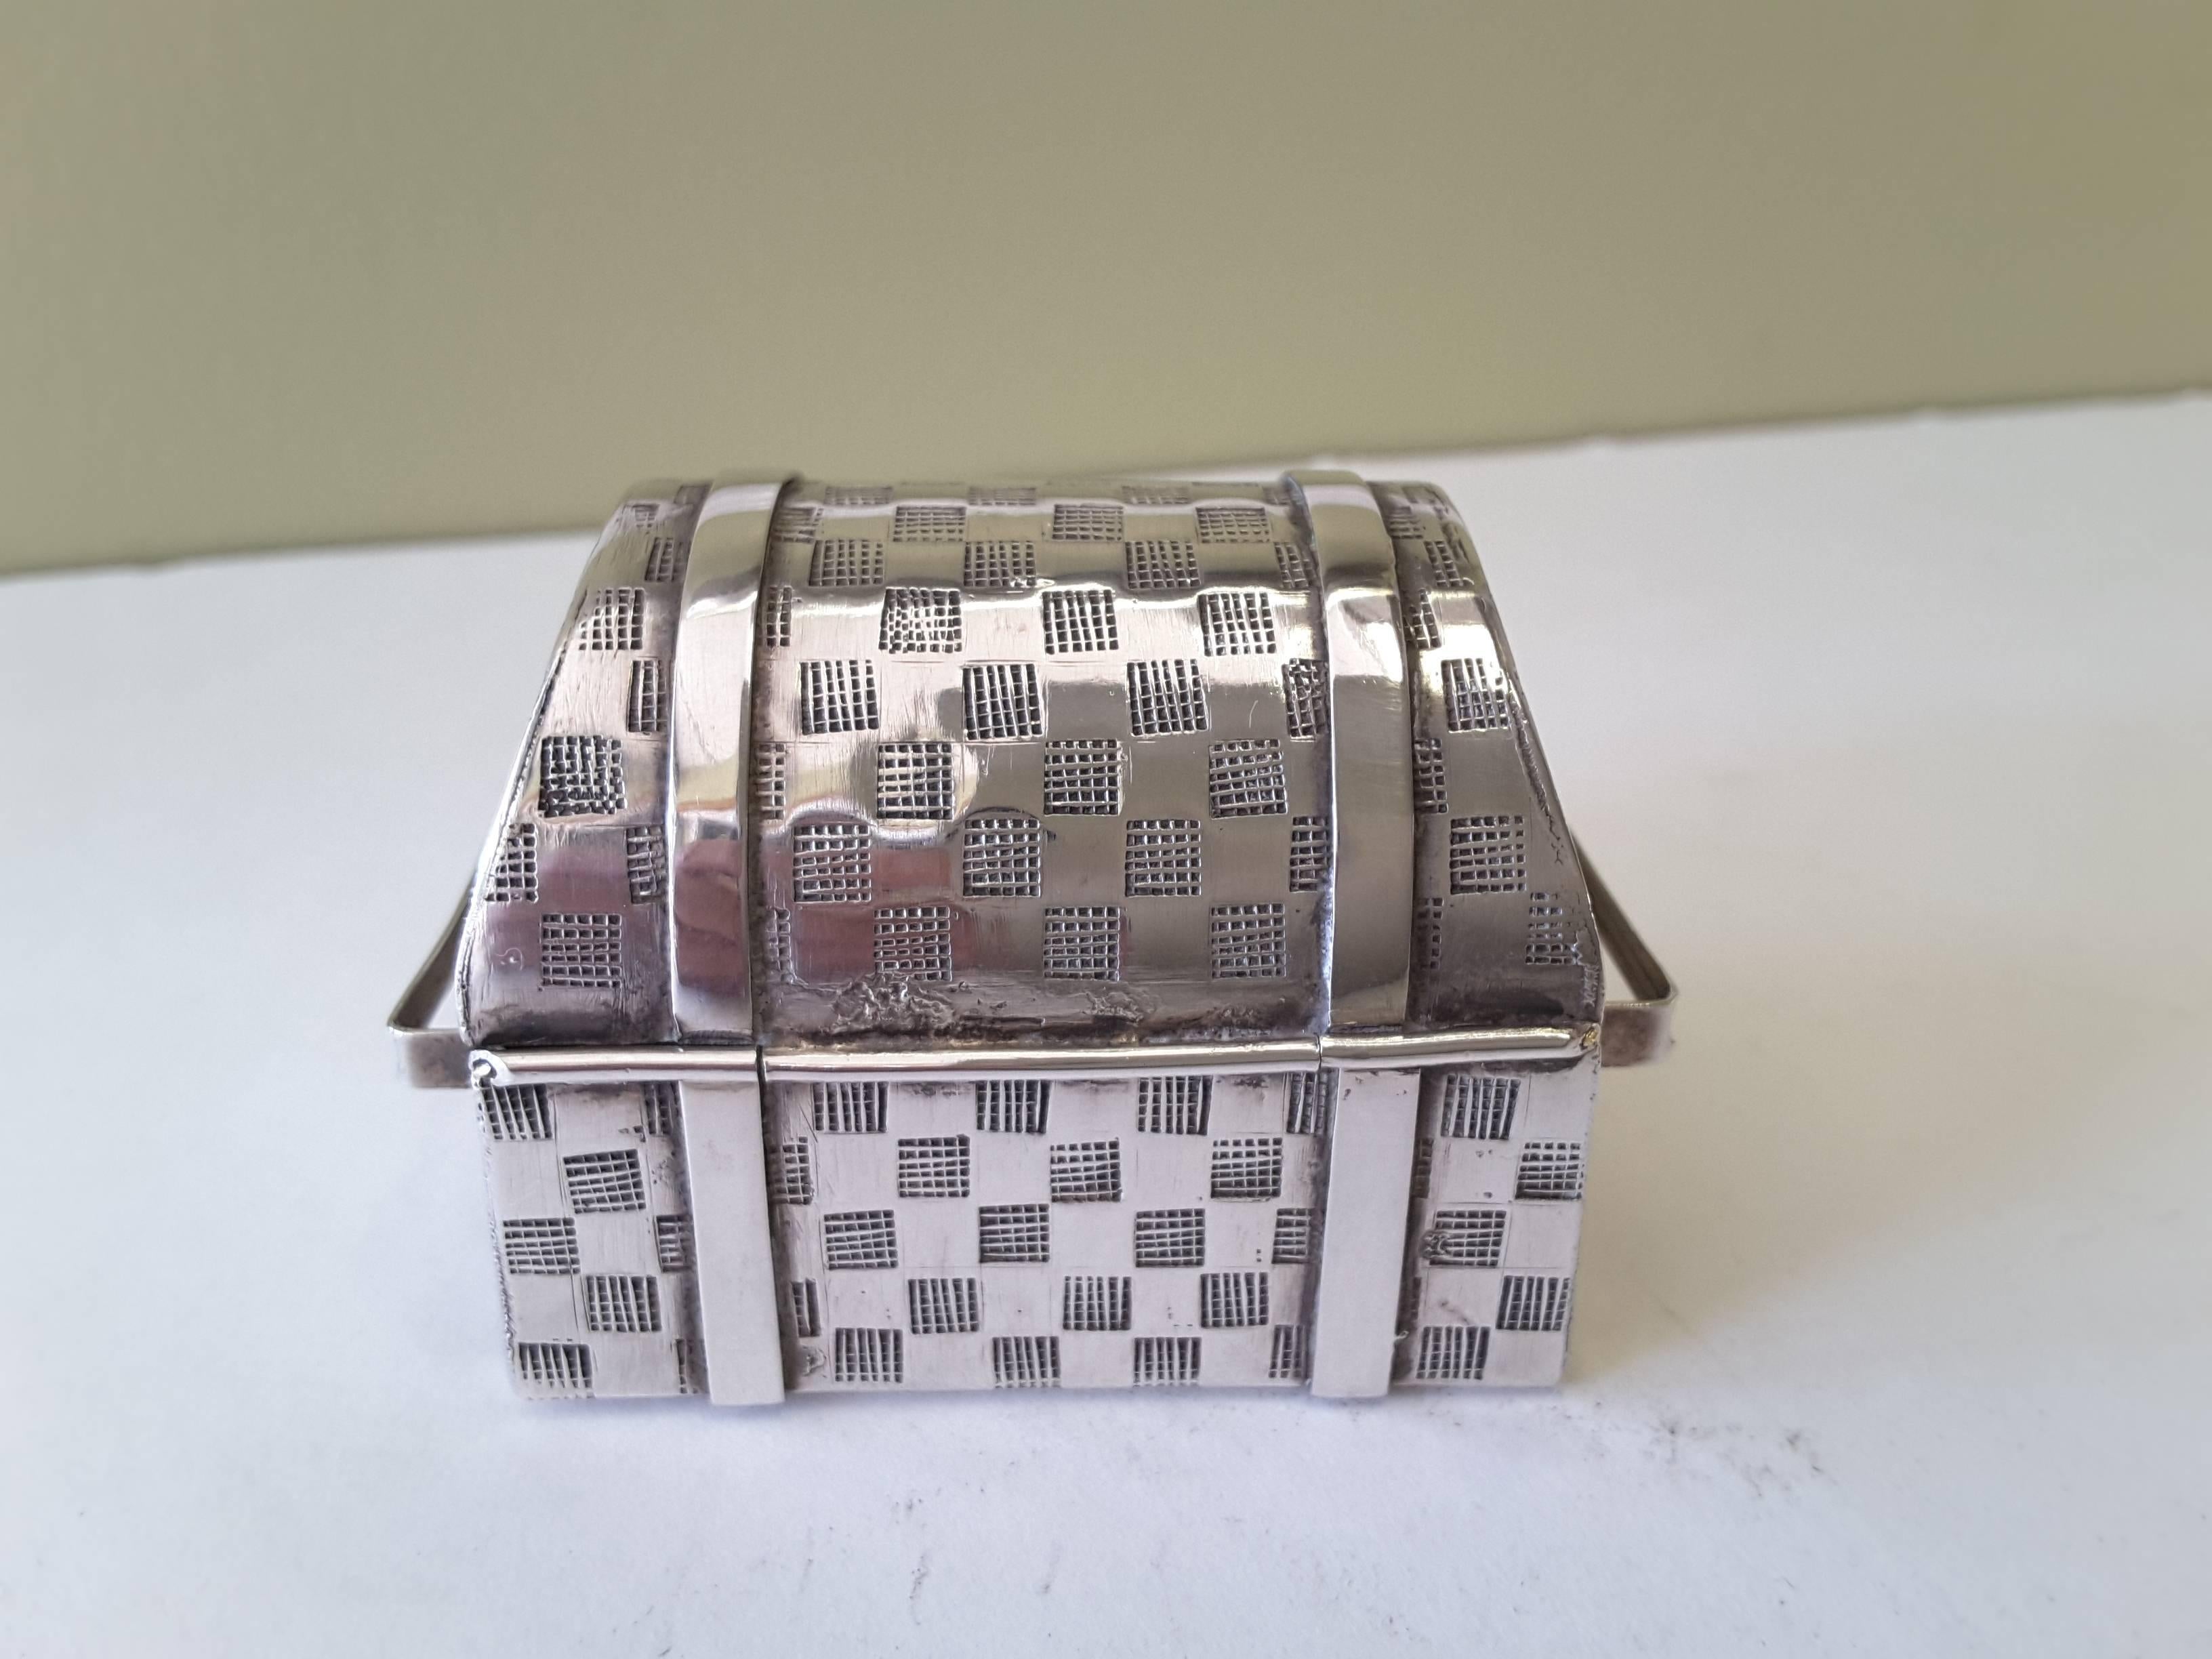 Miniature dome top treasure chest box marked .925 Peru, with Sun God stamp. The Trinket box is in the form of a treasure chest, woven pattern and straps with open handles on the side and the front has working movable hasp for a lock.
Great little